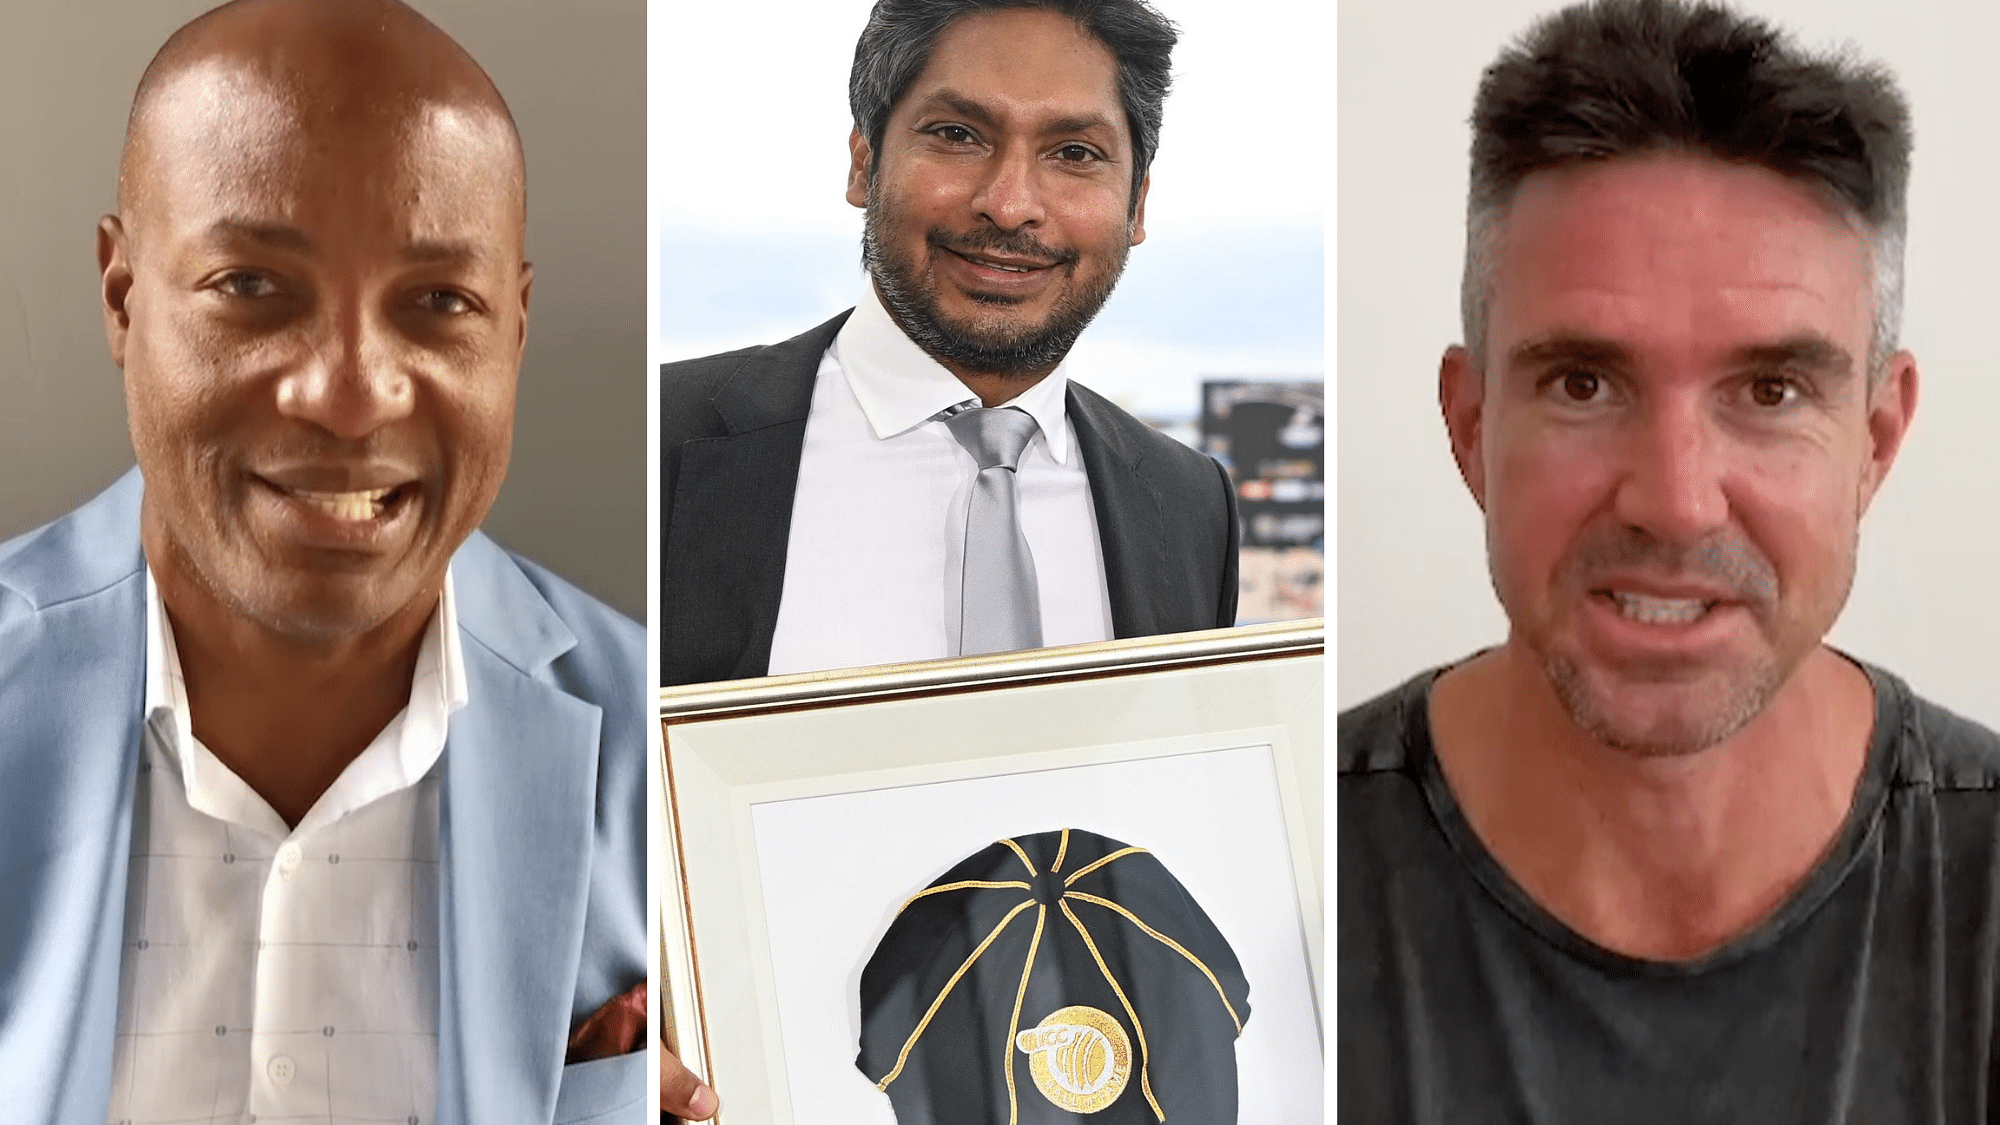 Kumar Sangakkara was among 10 cricketers inducted into the ICC’s Hall of Fame this June.